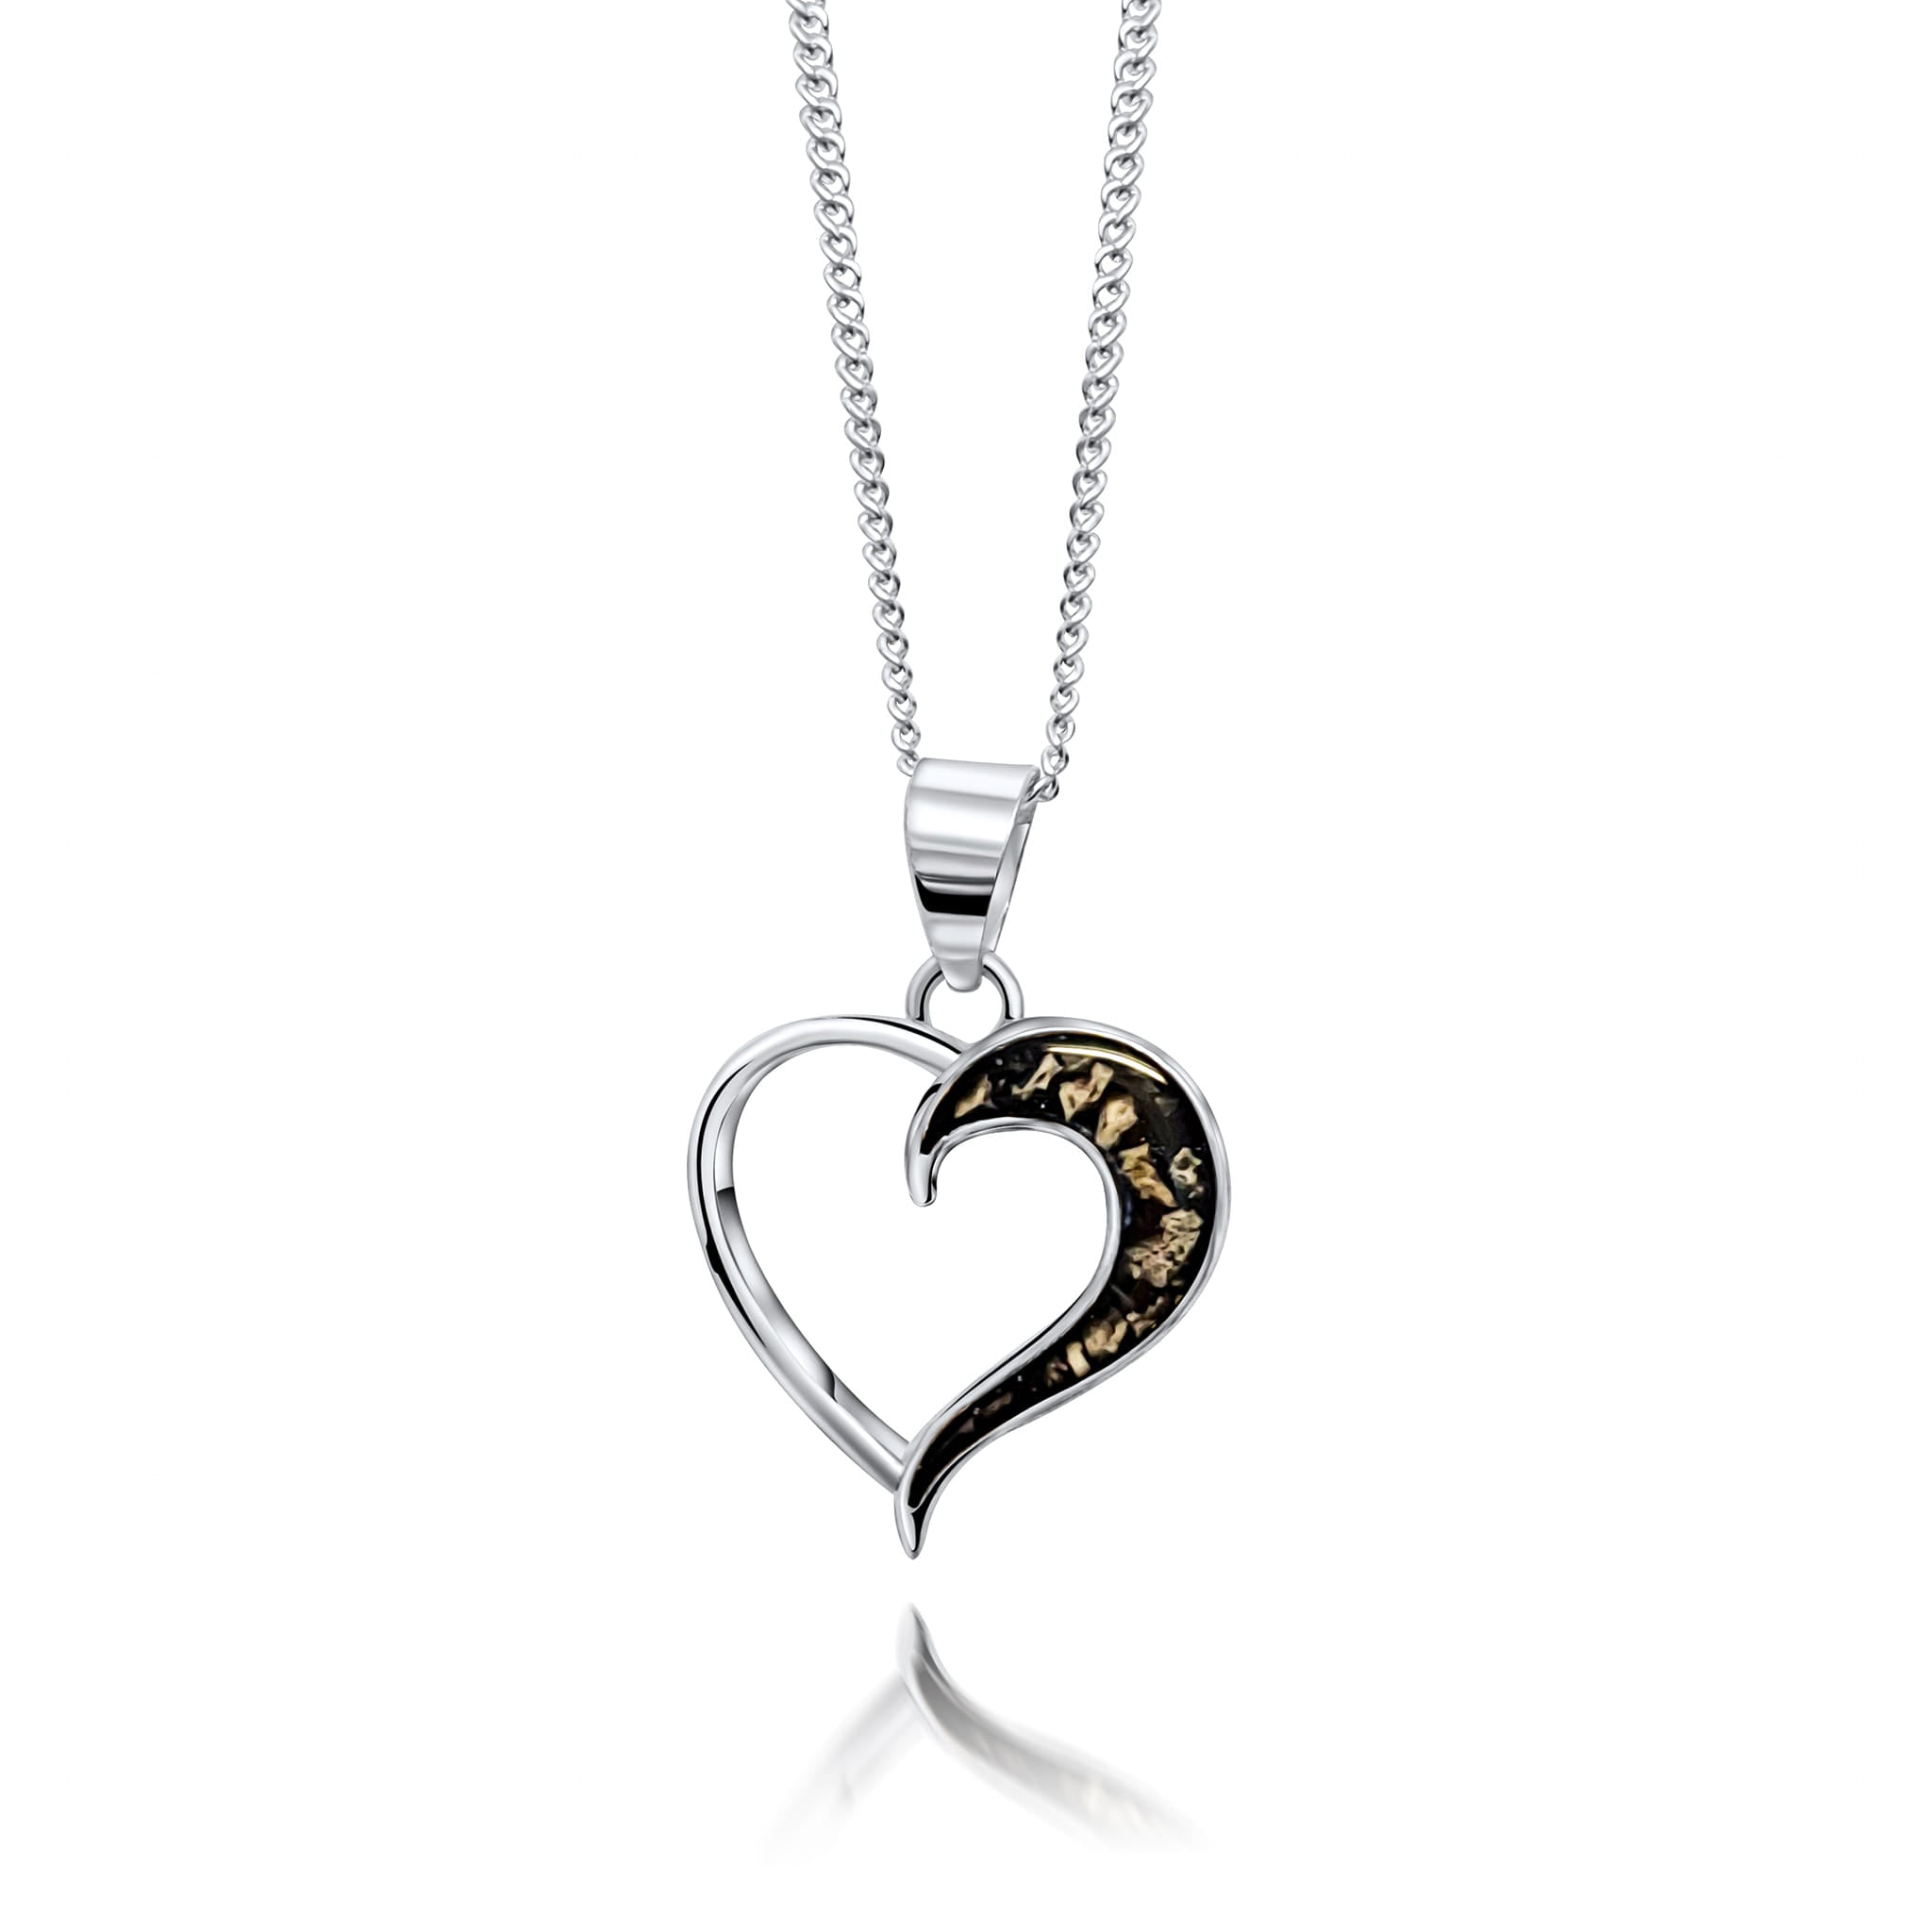 NEW Speciality product - SK - My beautiful heart - Memorial pendant. 11 weeks